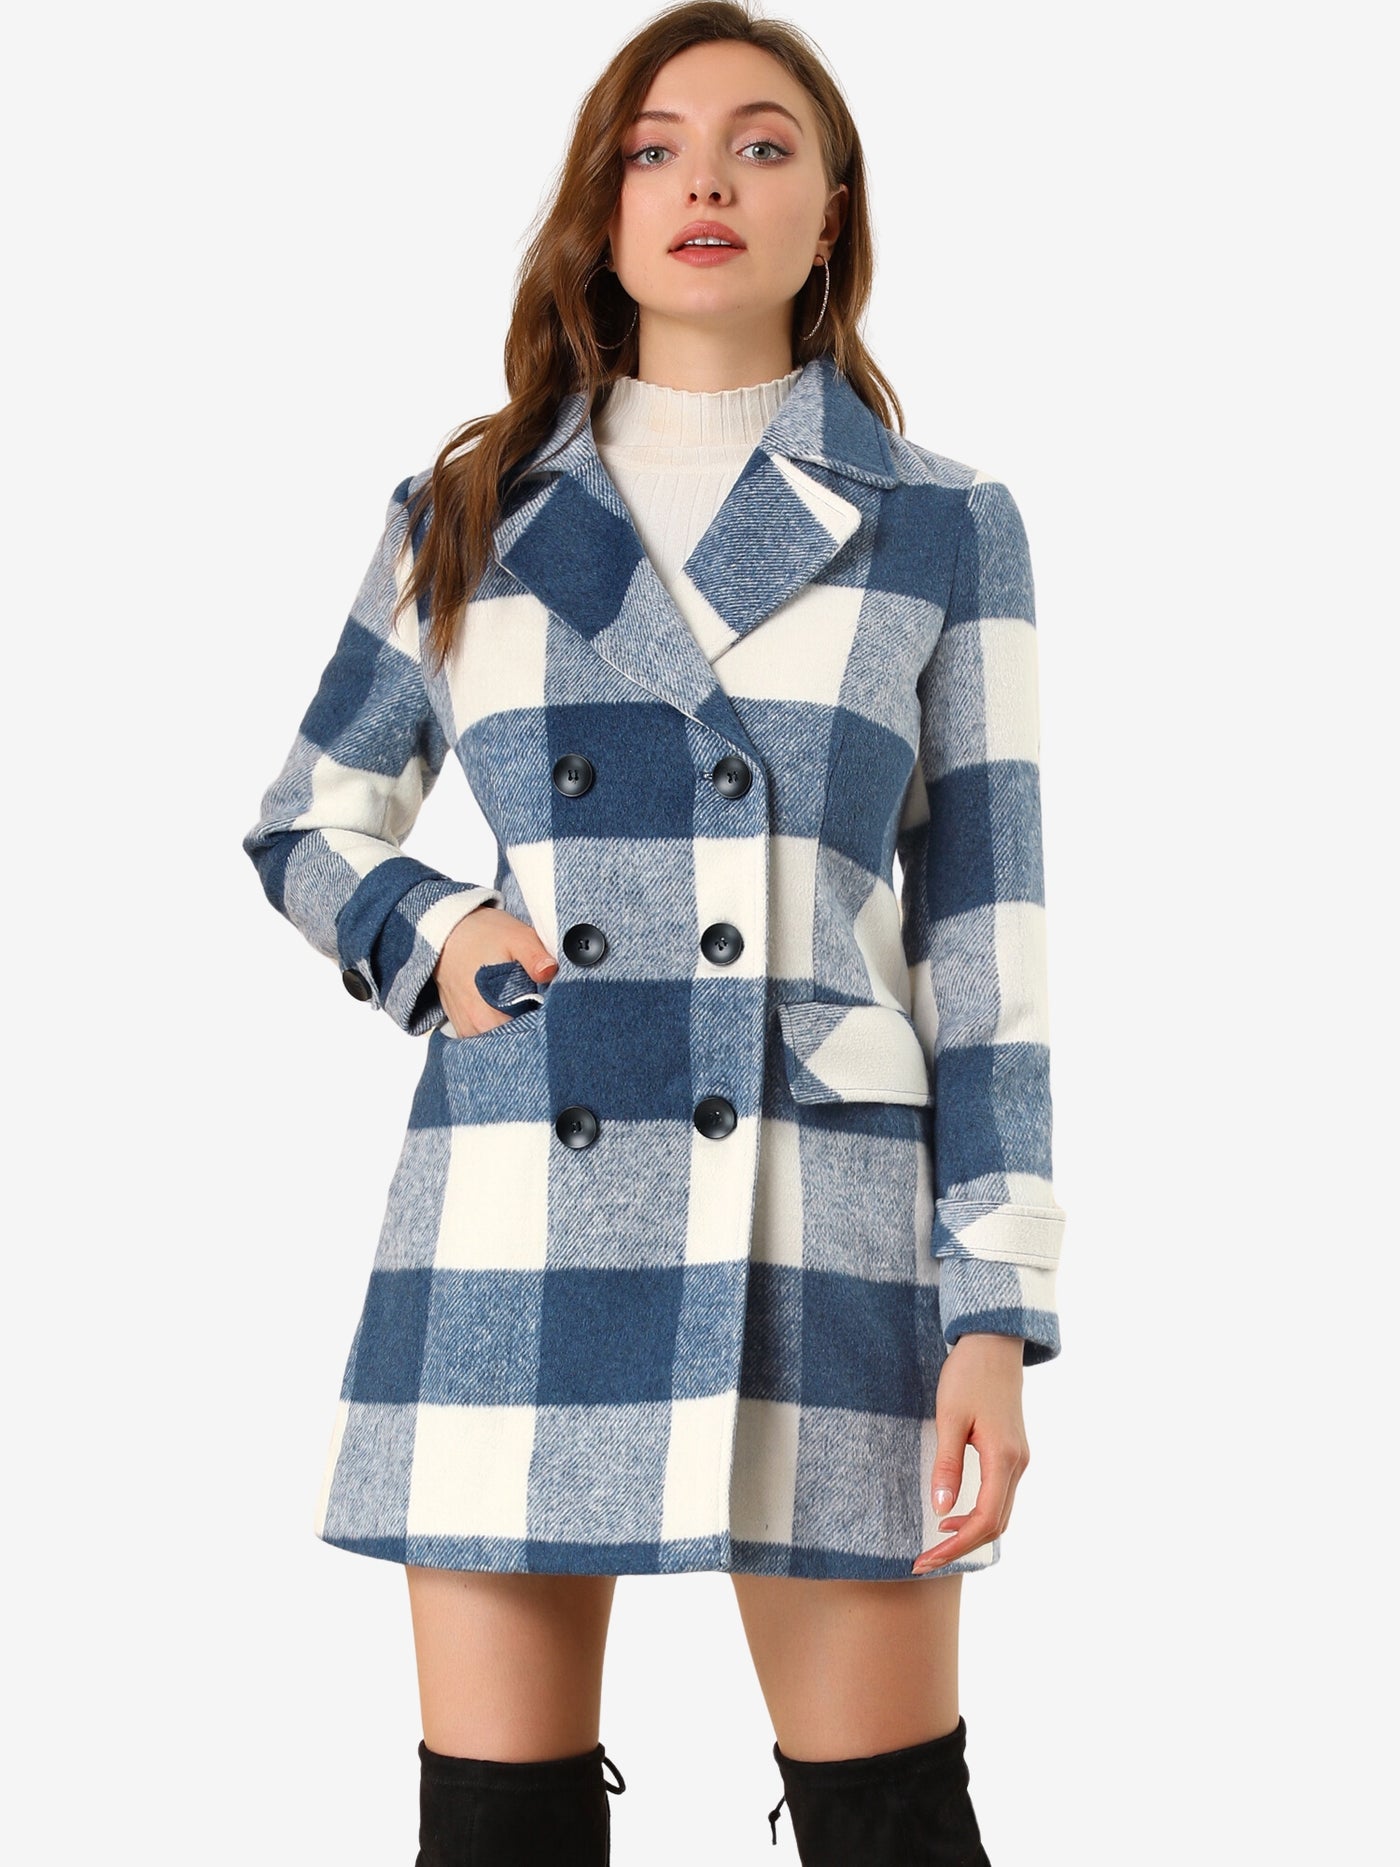 Allegra K Buffalo Checks Double Breasted Notched Lapel Plaid Trench Coat